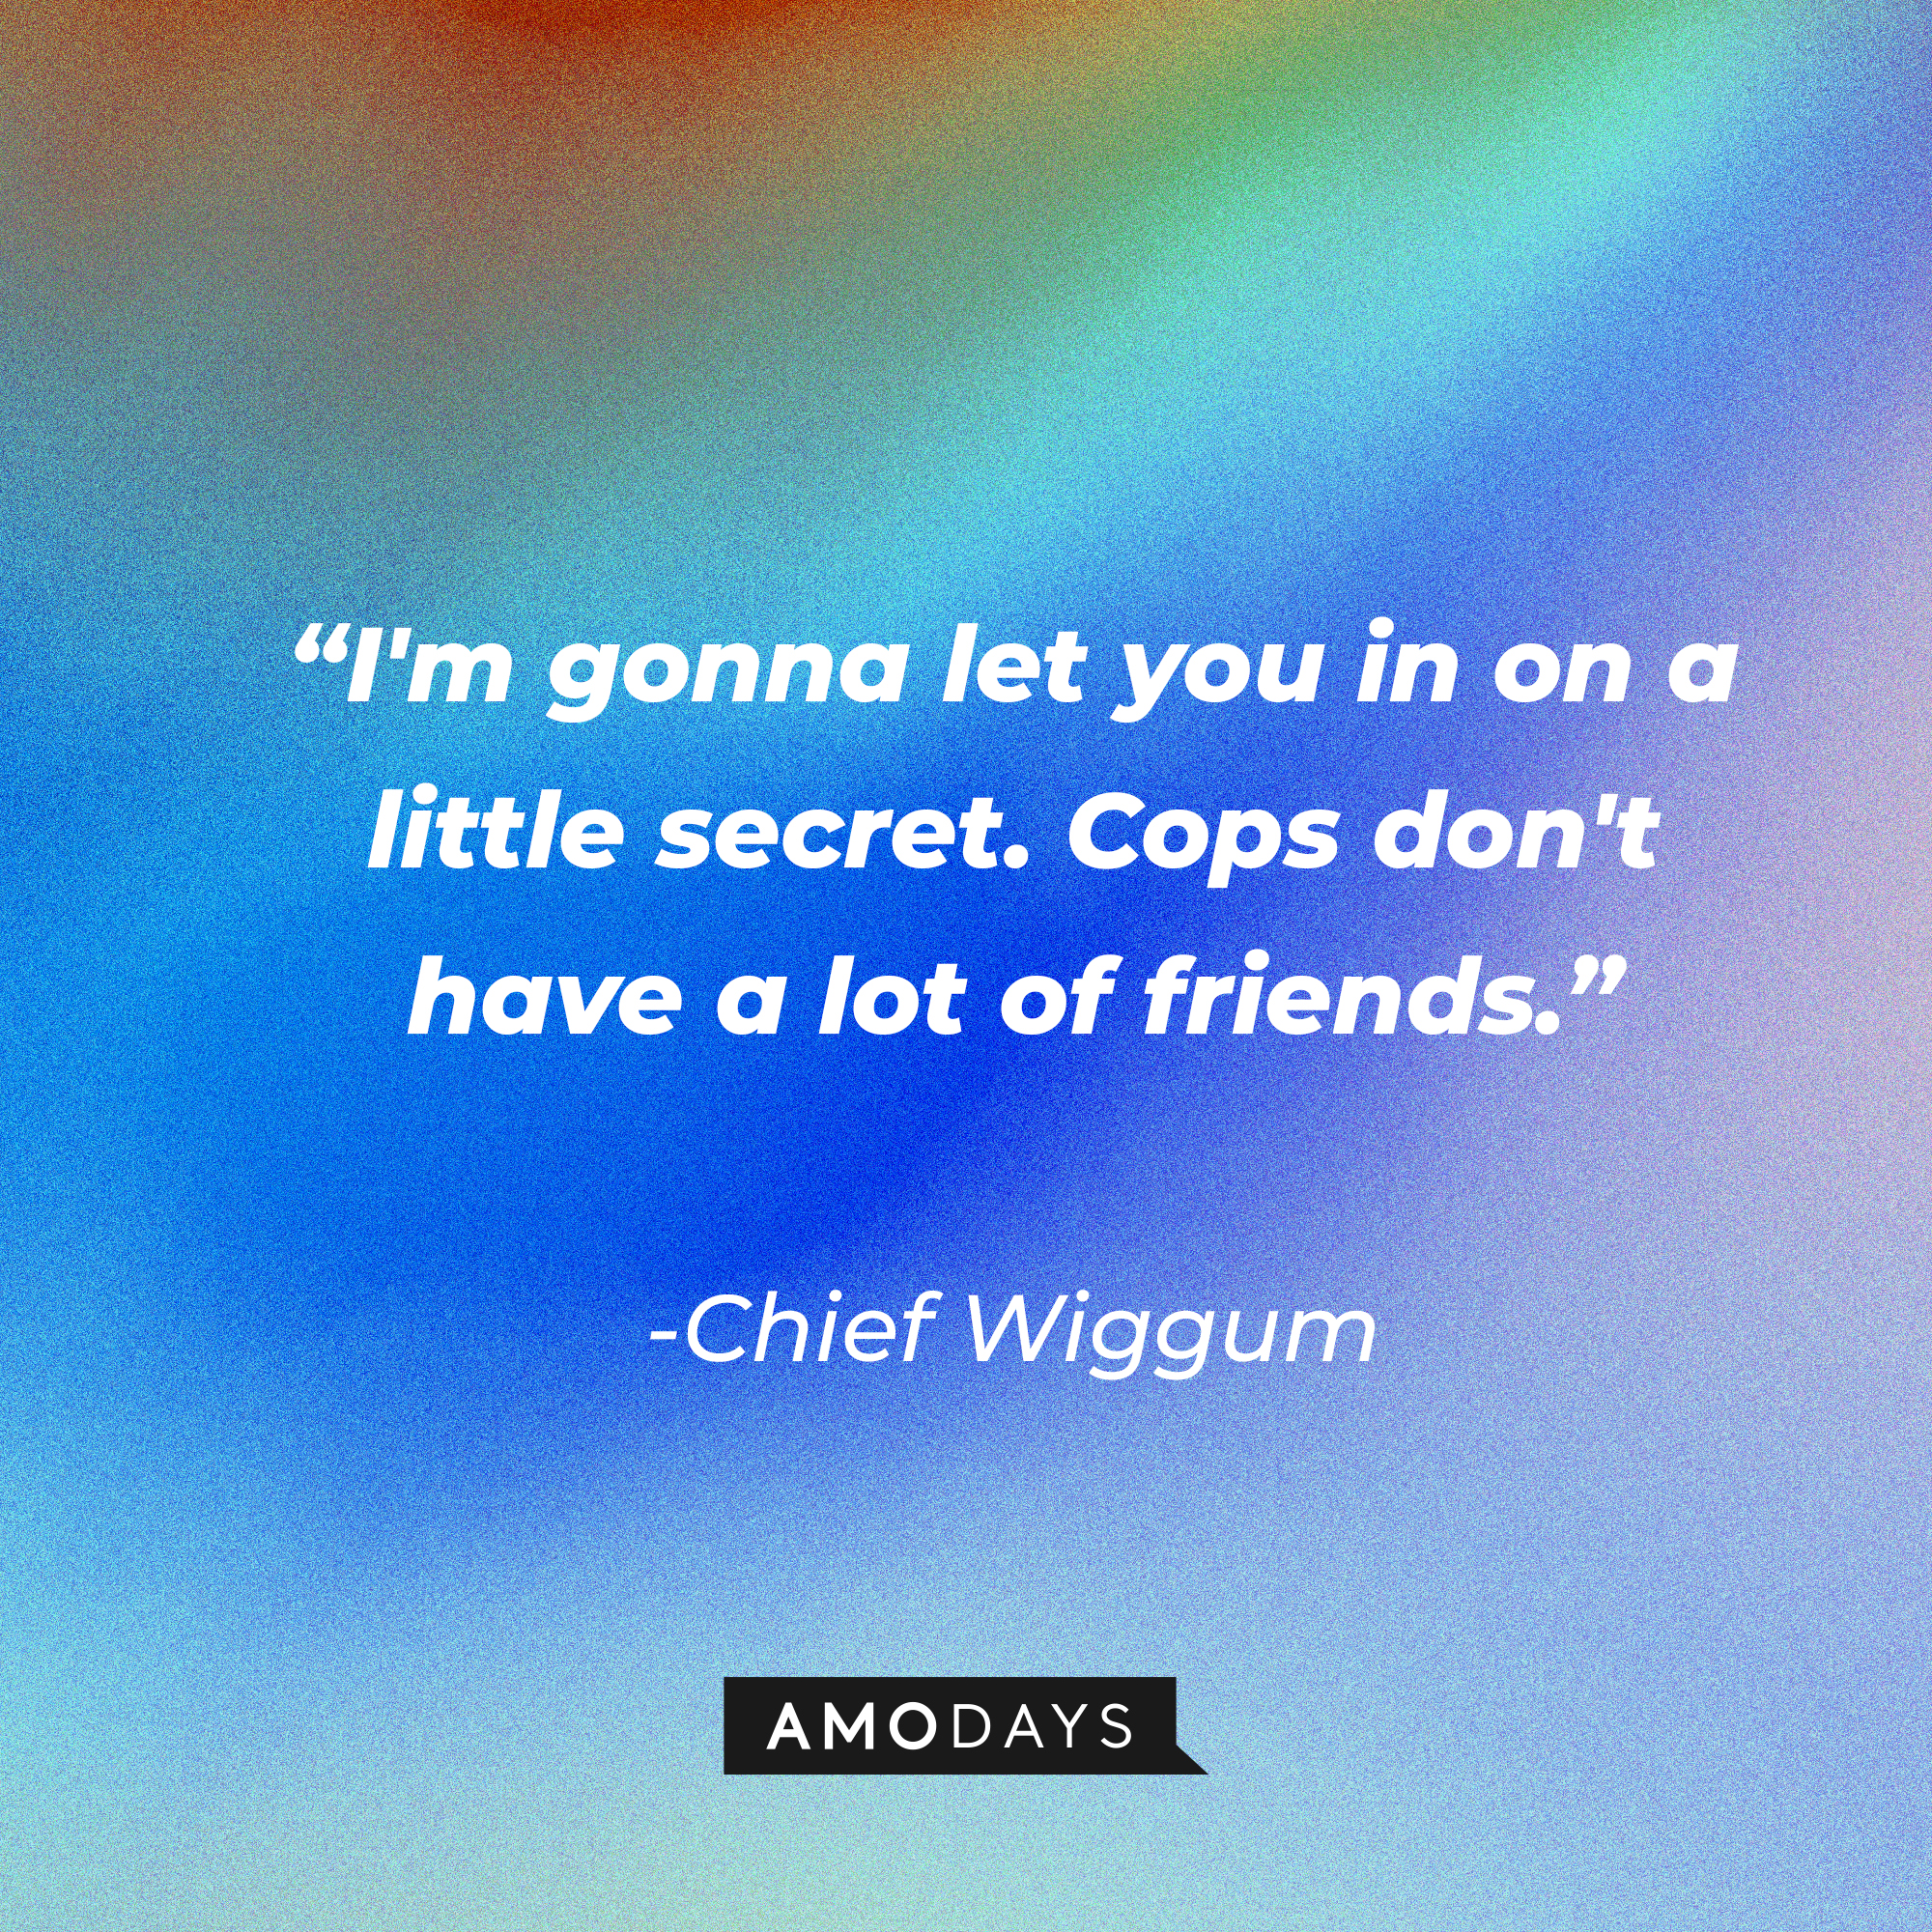 Chief Wiggum’s quote: "I'm gonna let you in on a little secret. Cops don't have a lot of friends.” |  Source: Amodays